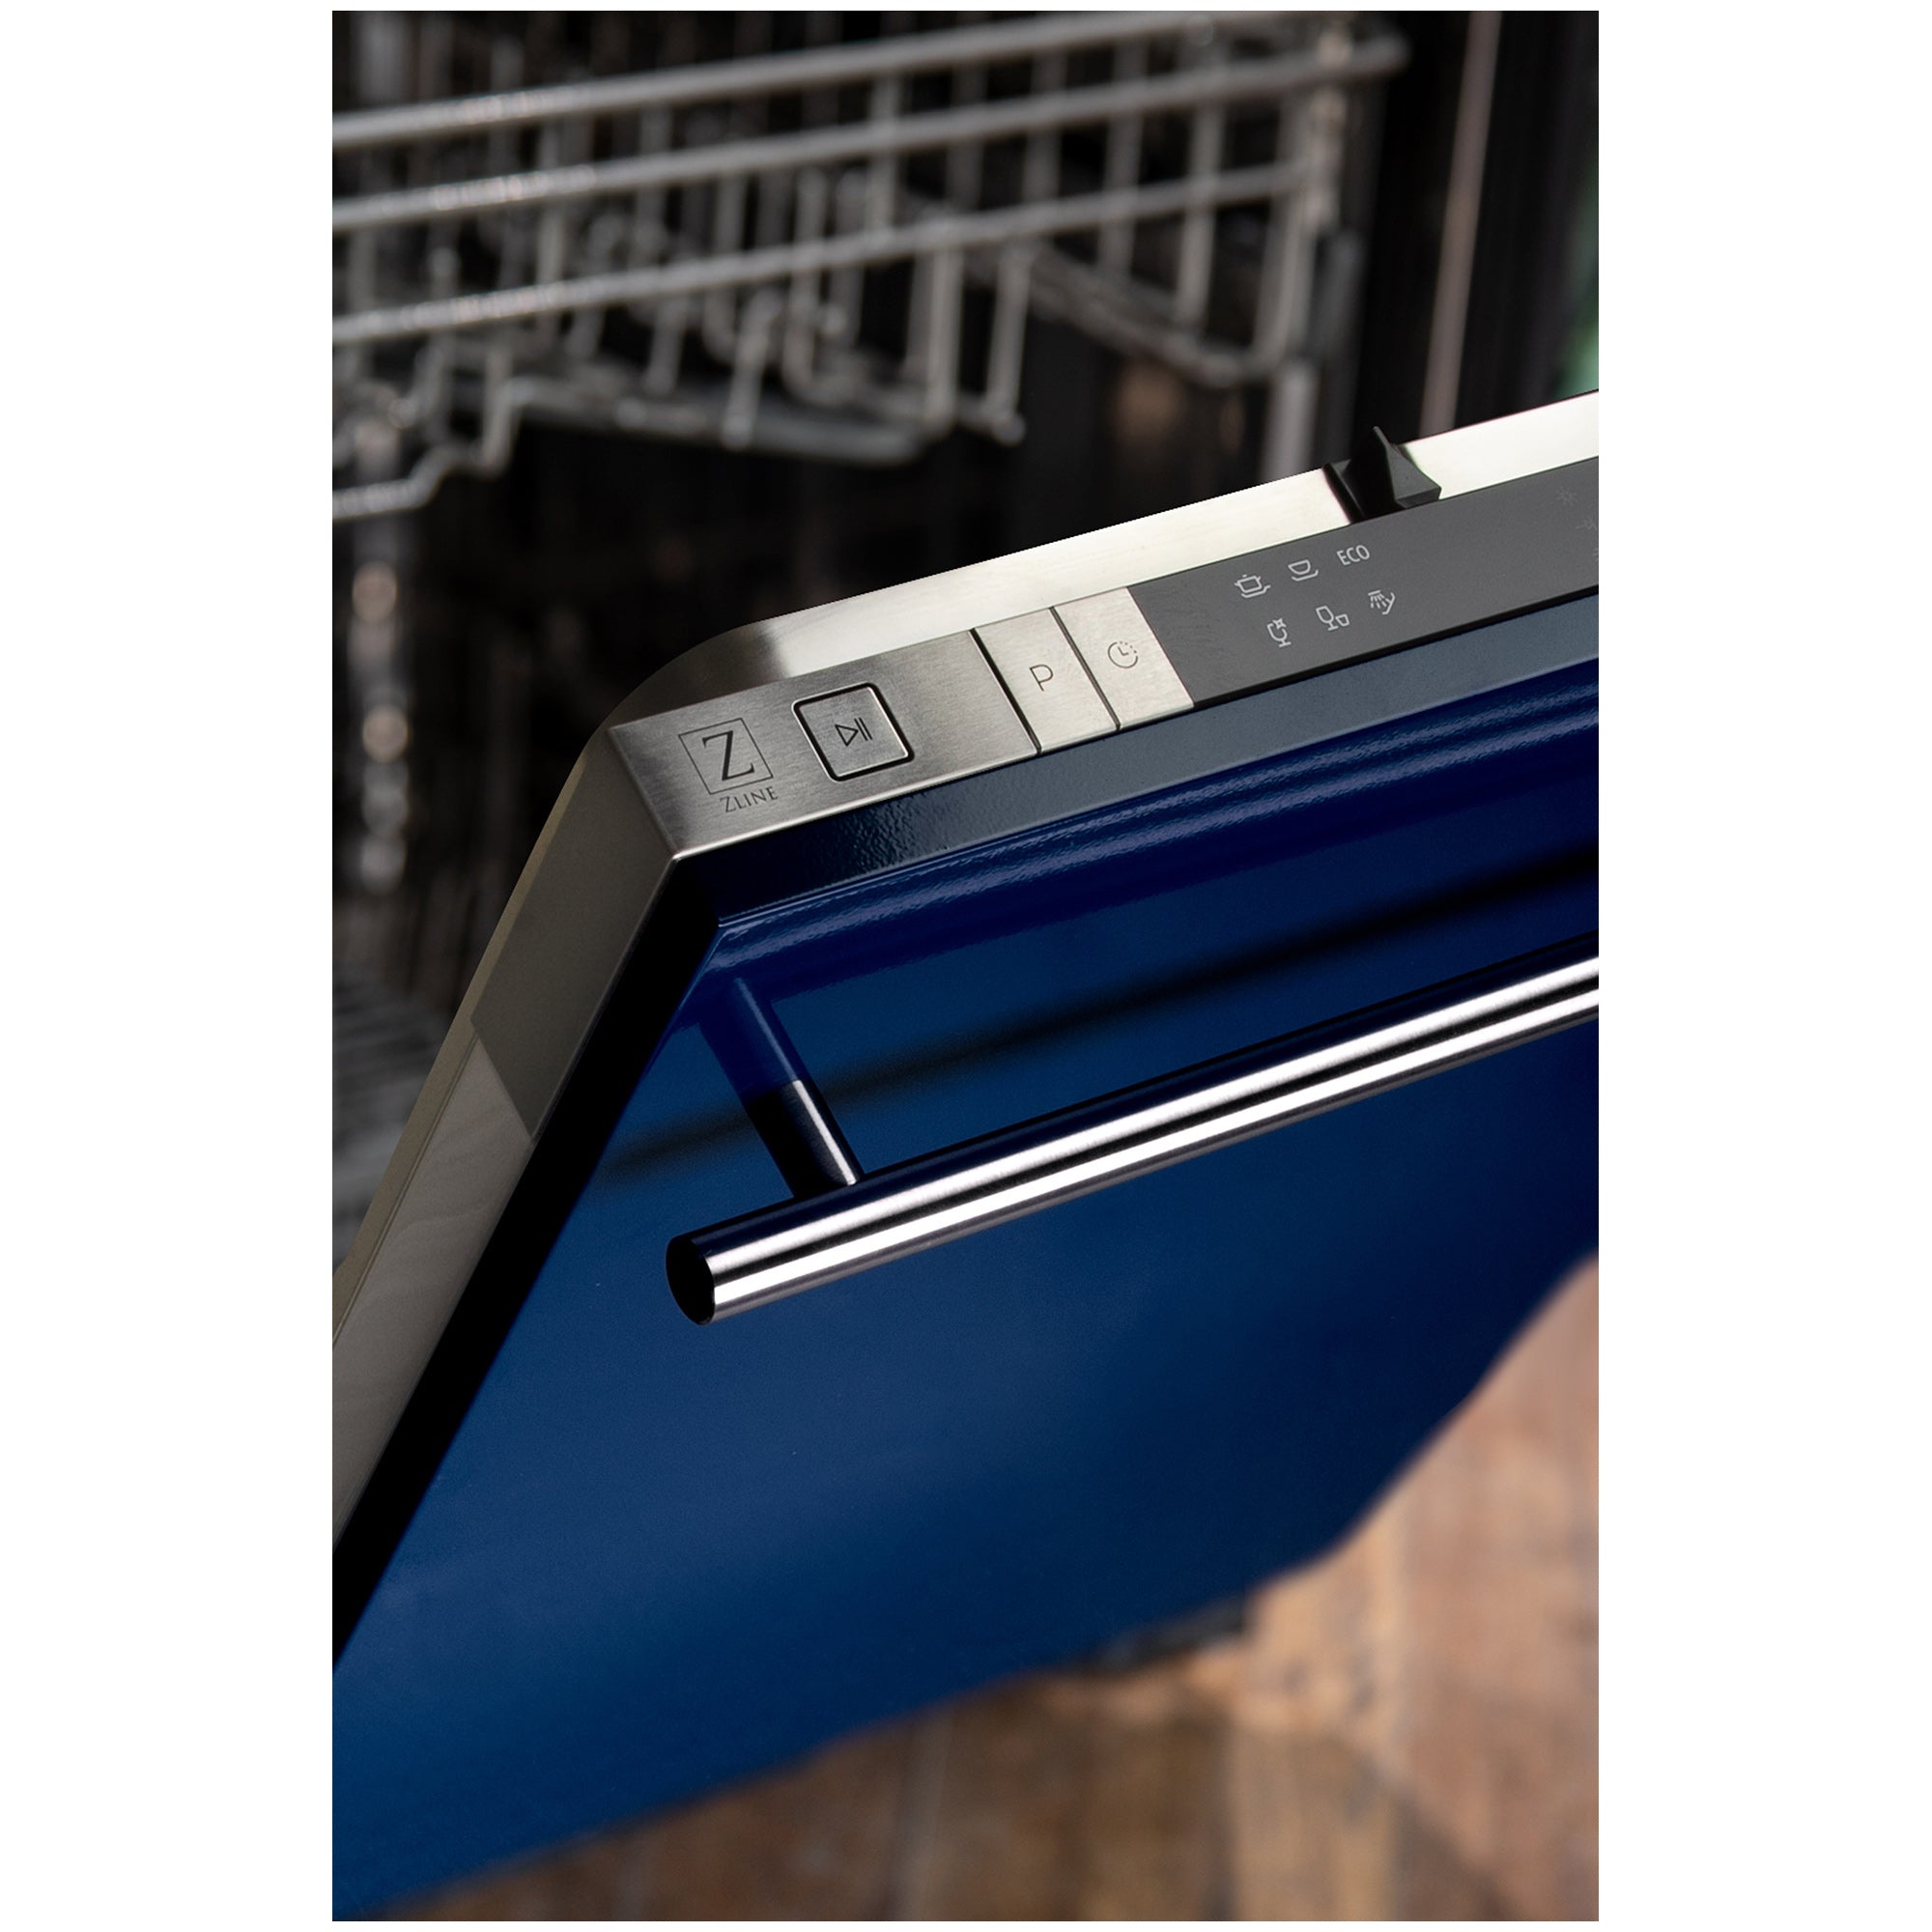 ZLINE 18 in. Compact Blue Gloss Top Control Dishwasher with Stainless Steel Tub and Modern Style Handle, 52dBa (DW-BG-H-18)